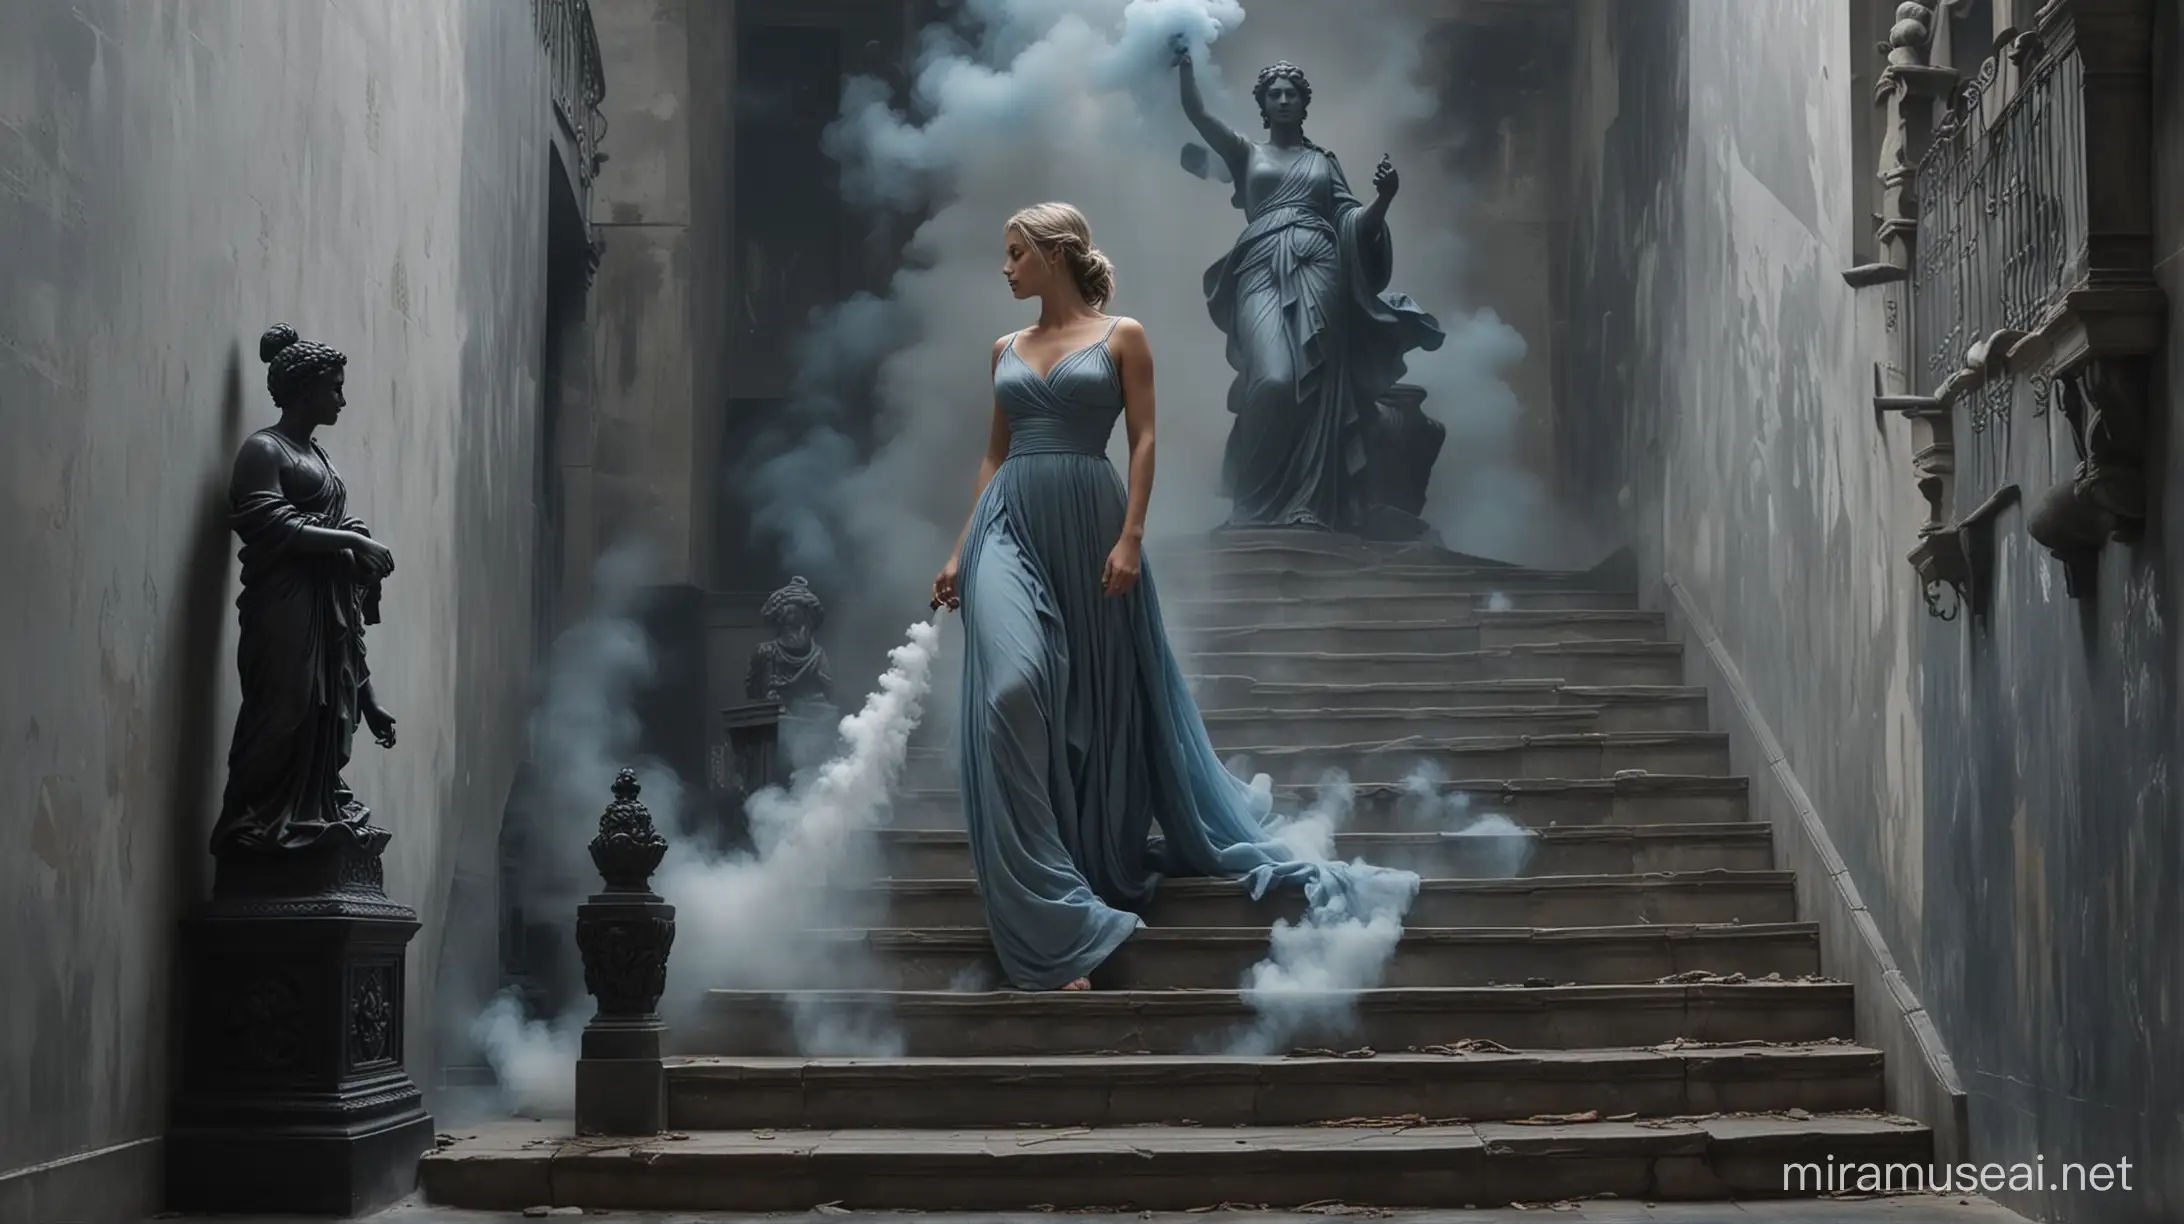 Stoic Woman Descending Stairs Amidst Kneeling Statues and Ethereal Smoke